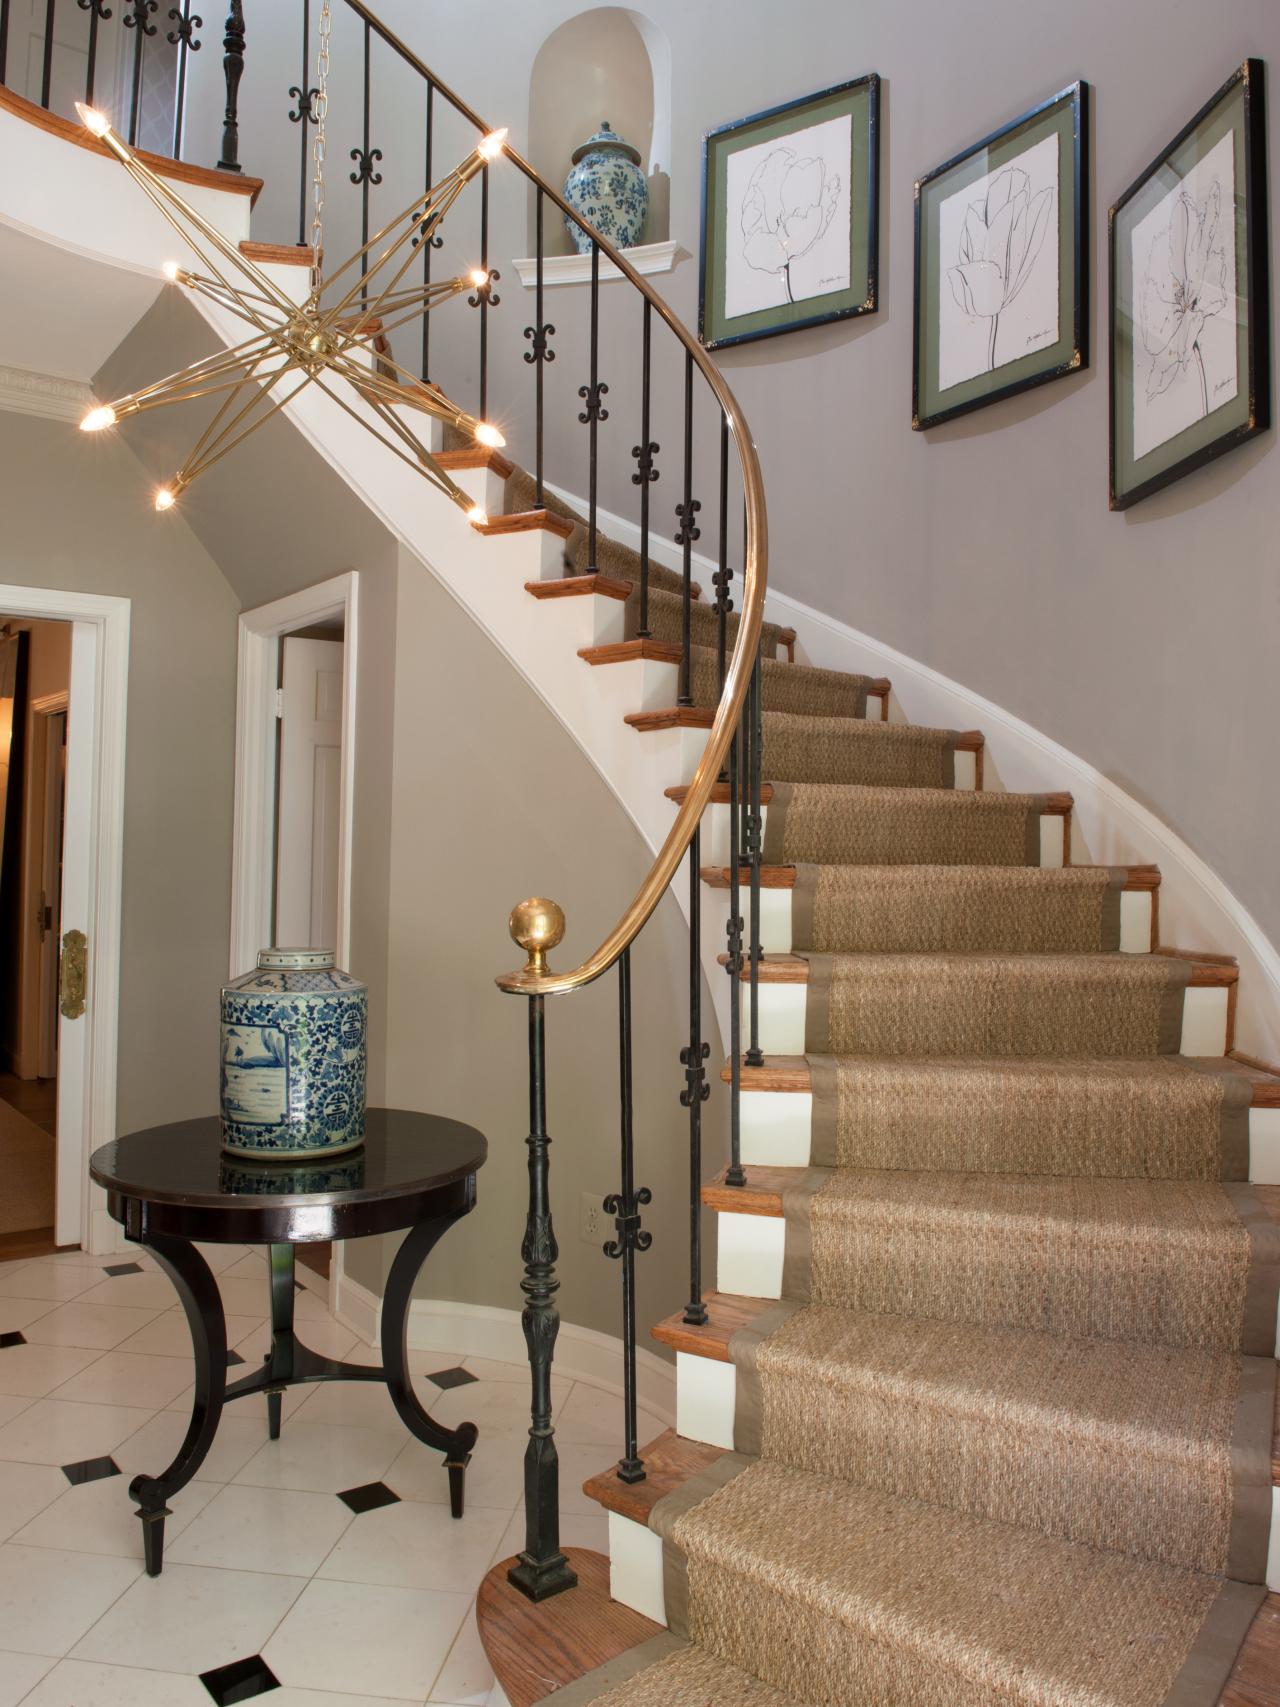 Designed by Matthew Moore, this winding staircase with a gold ...